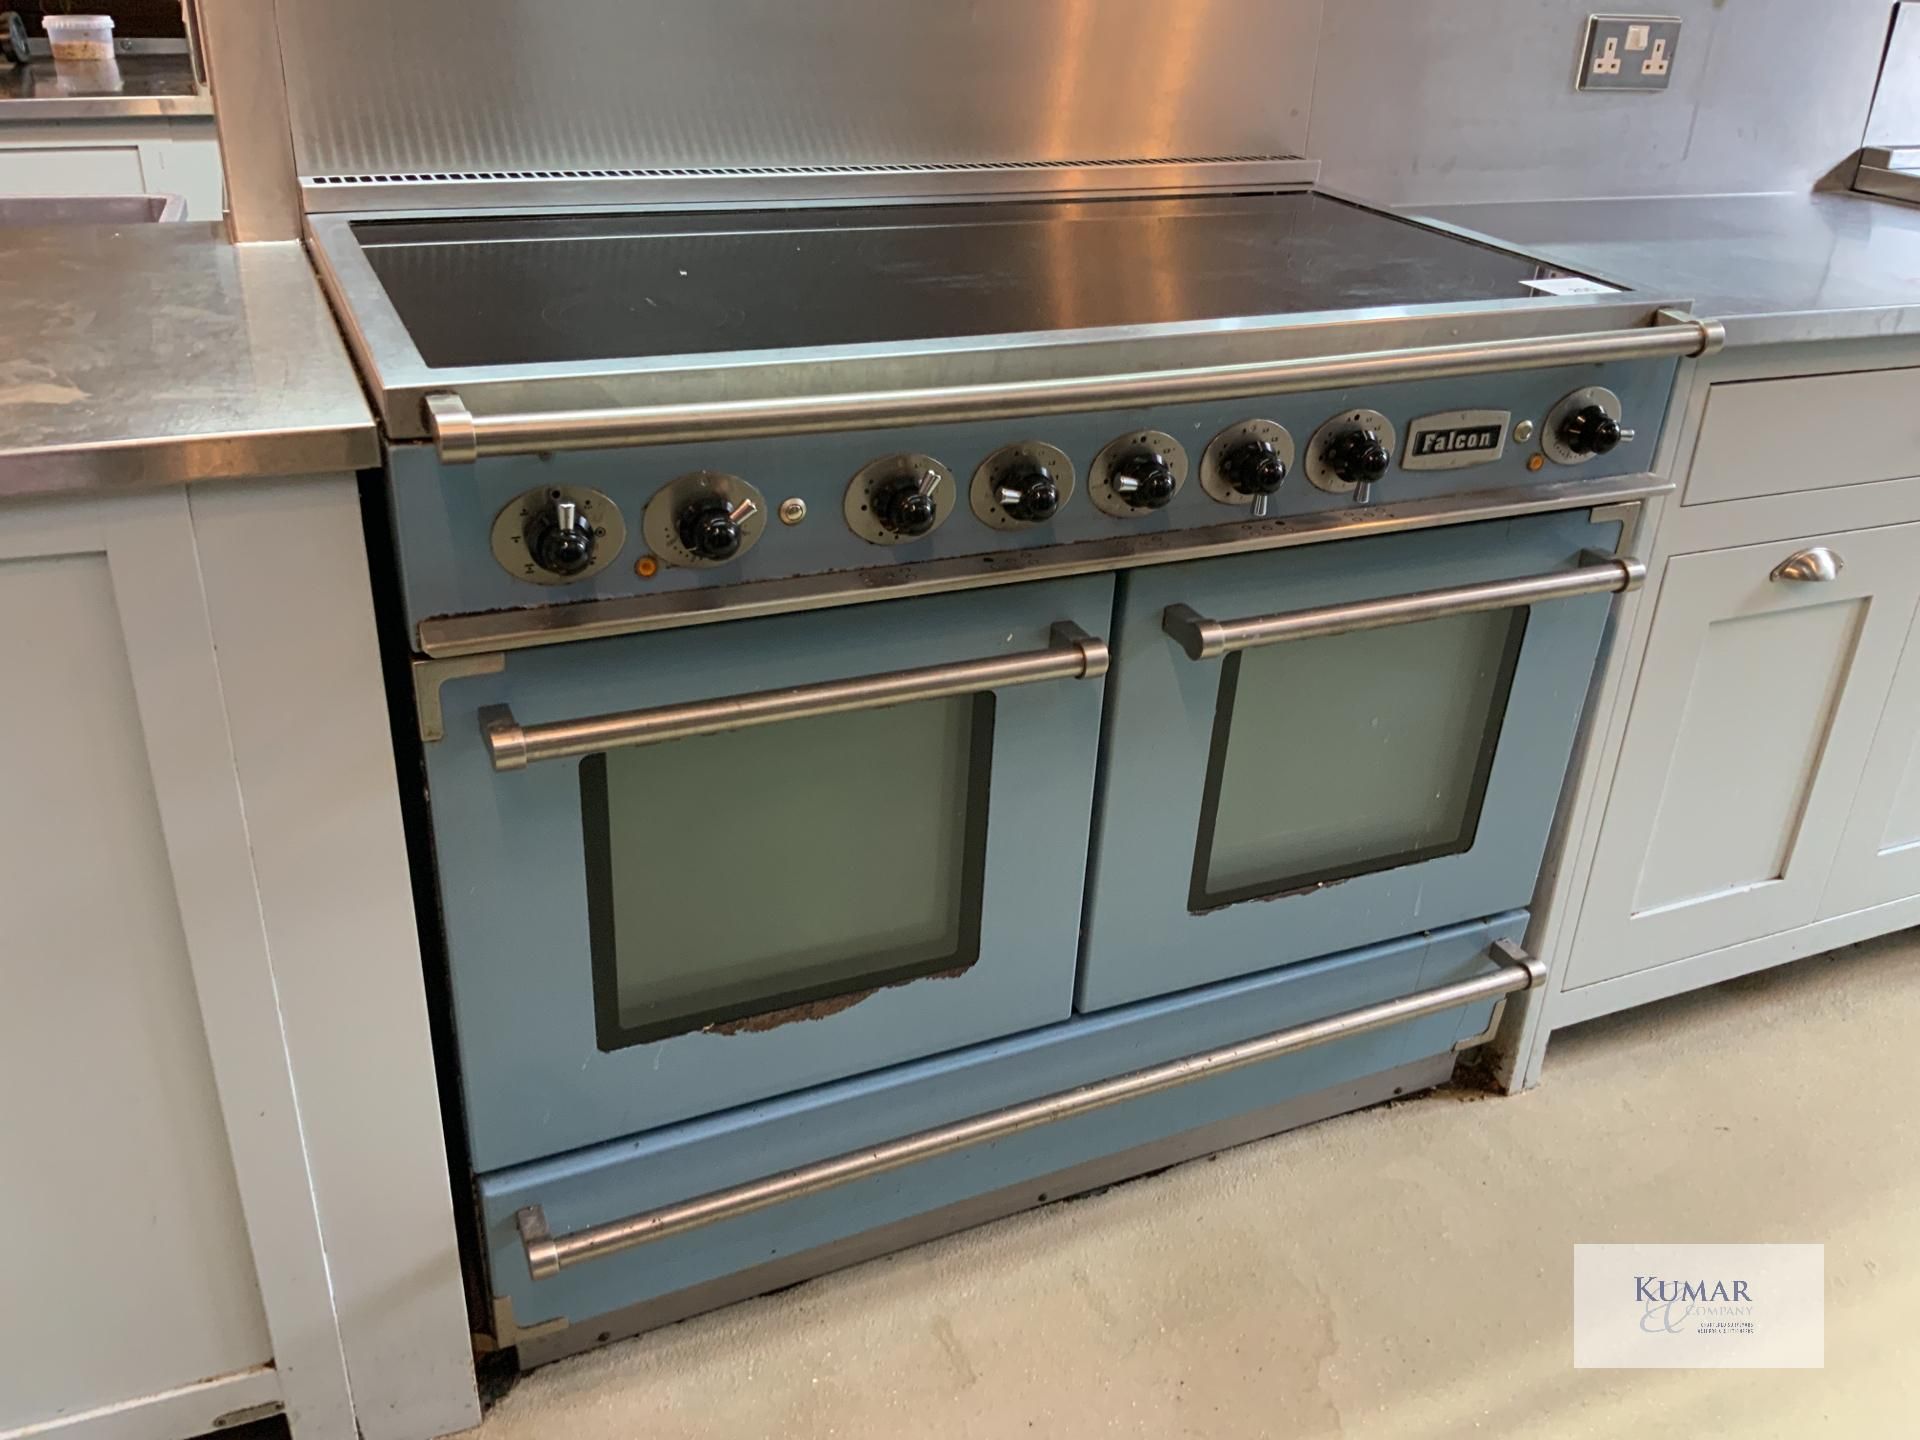 China Blue Aga Rangemaster Falcon Continental 1092 Range Cookers with Twin Ovens & 5 Position - Image 2 of 8